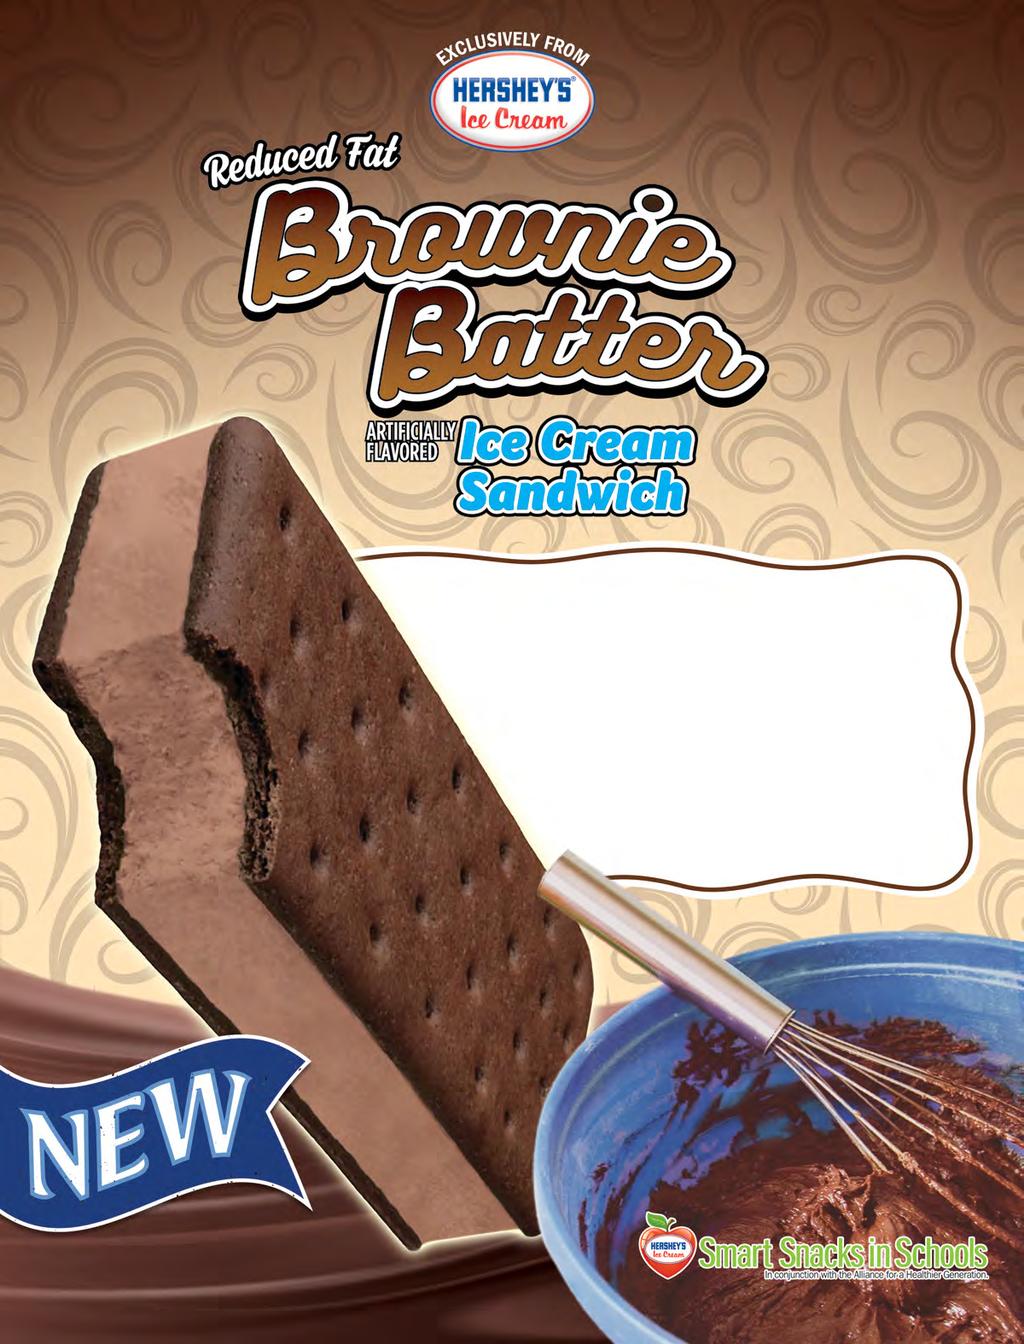 Enjoy reduced fat Brownie flavored ice cream sandwiched between two delicious chocolate wafers. 24 ct.